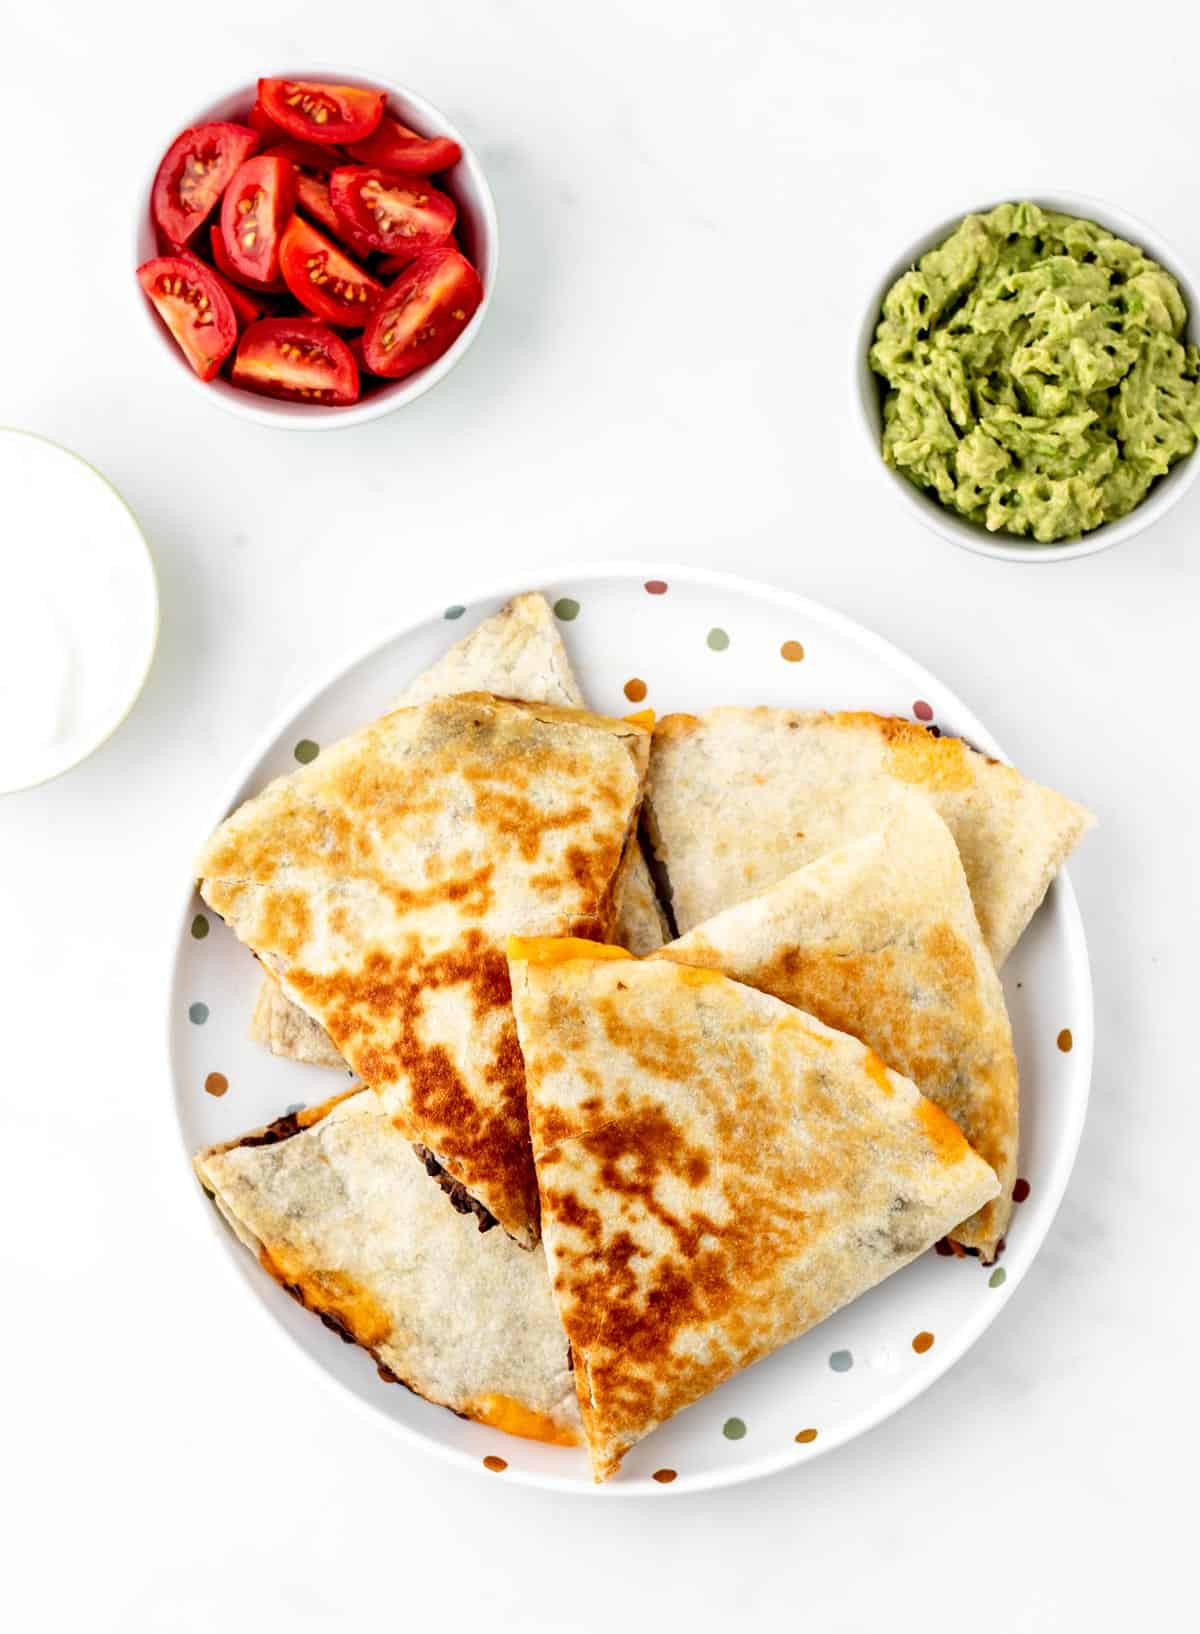 A pile of baby lead weaning quesadillas on a polka dot plate with guacamole and tomatoes.